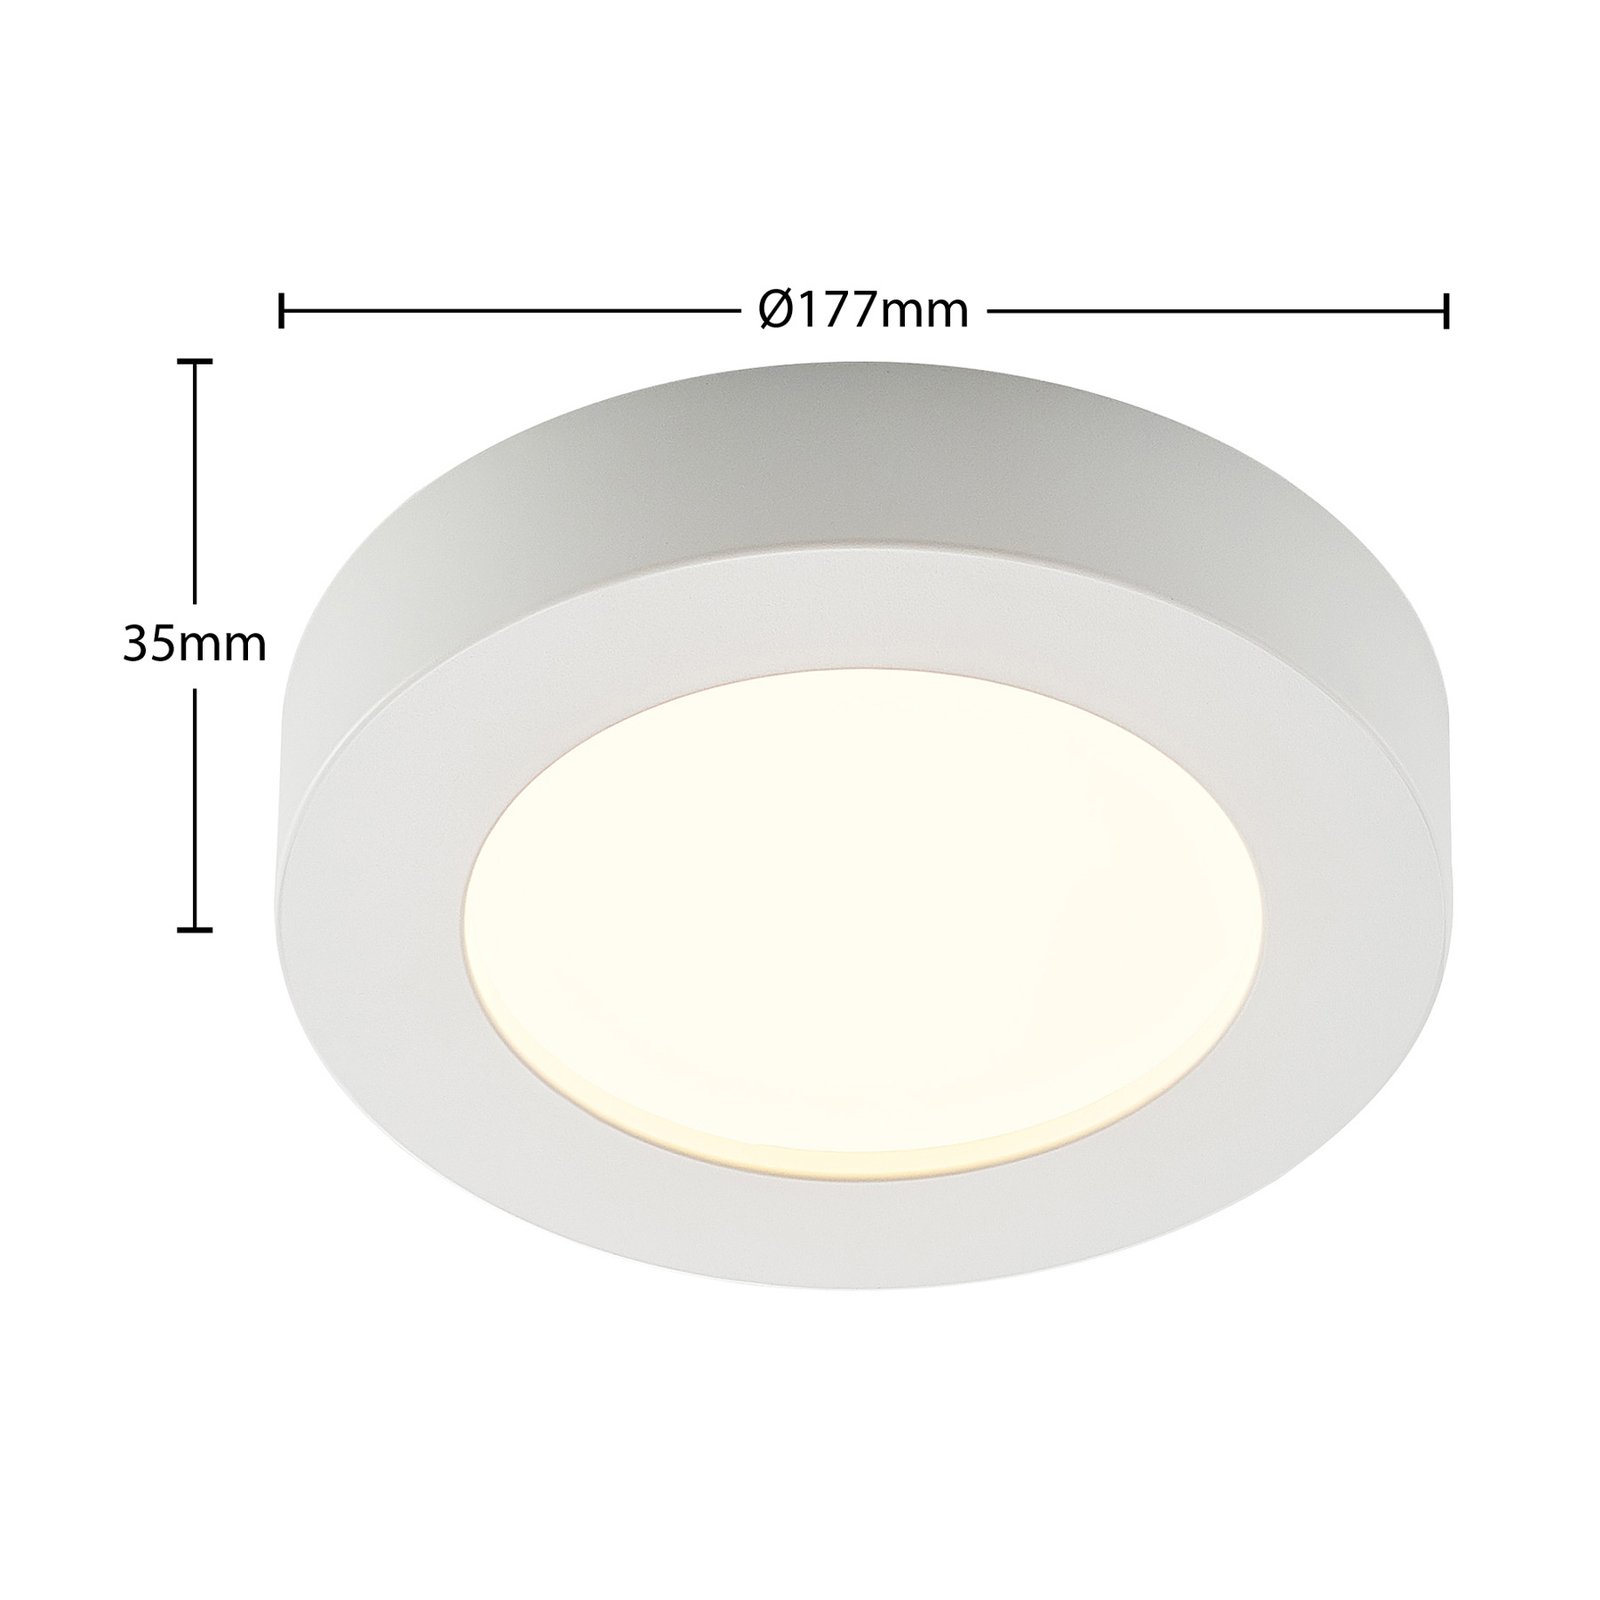 Prios LED ceiling light Edwina, white, 17.7 cm, dimmable